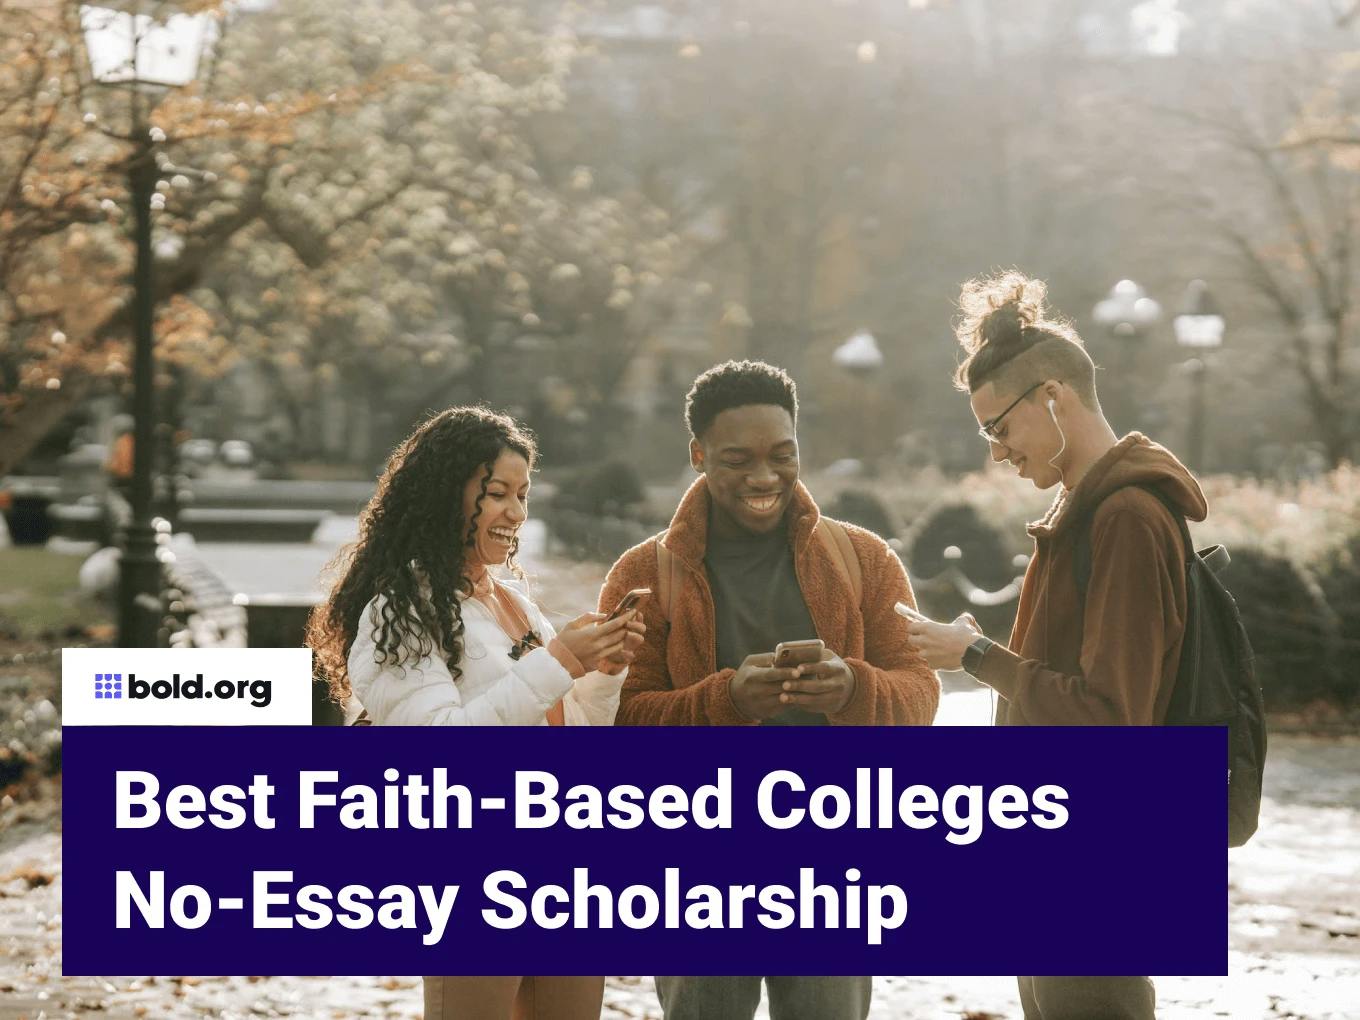 Best Faith-Based Colleges No-Essay Scholarship